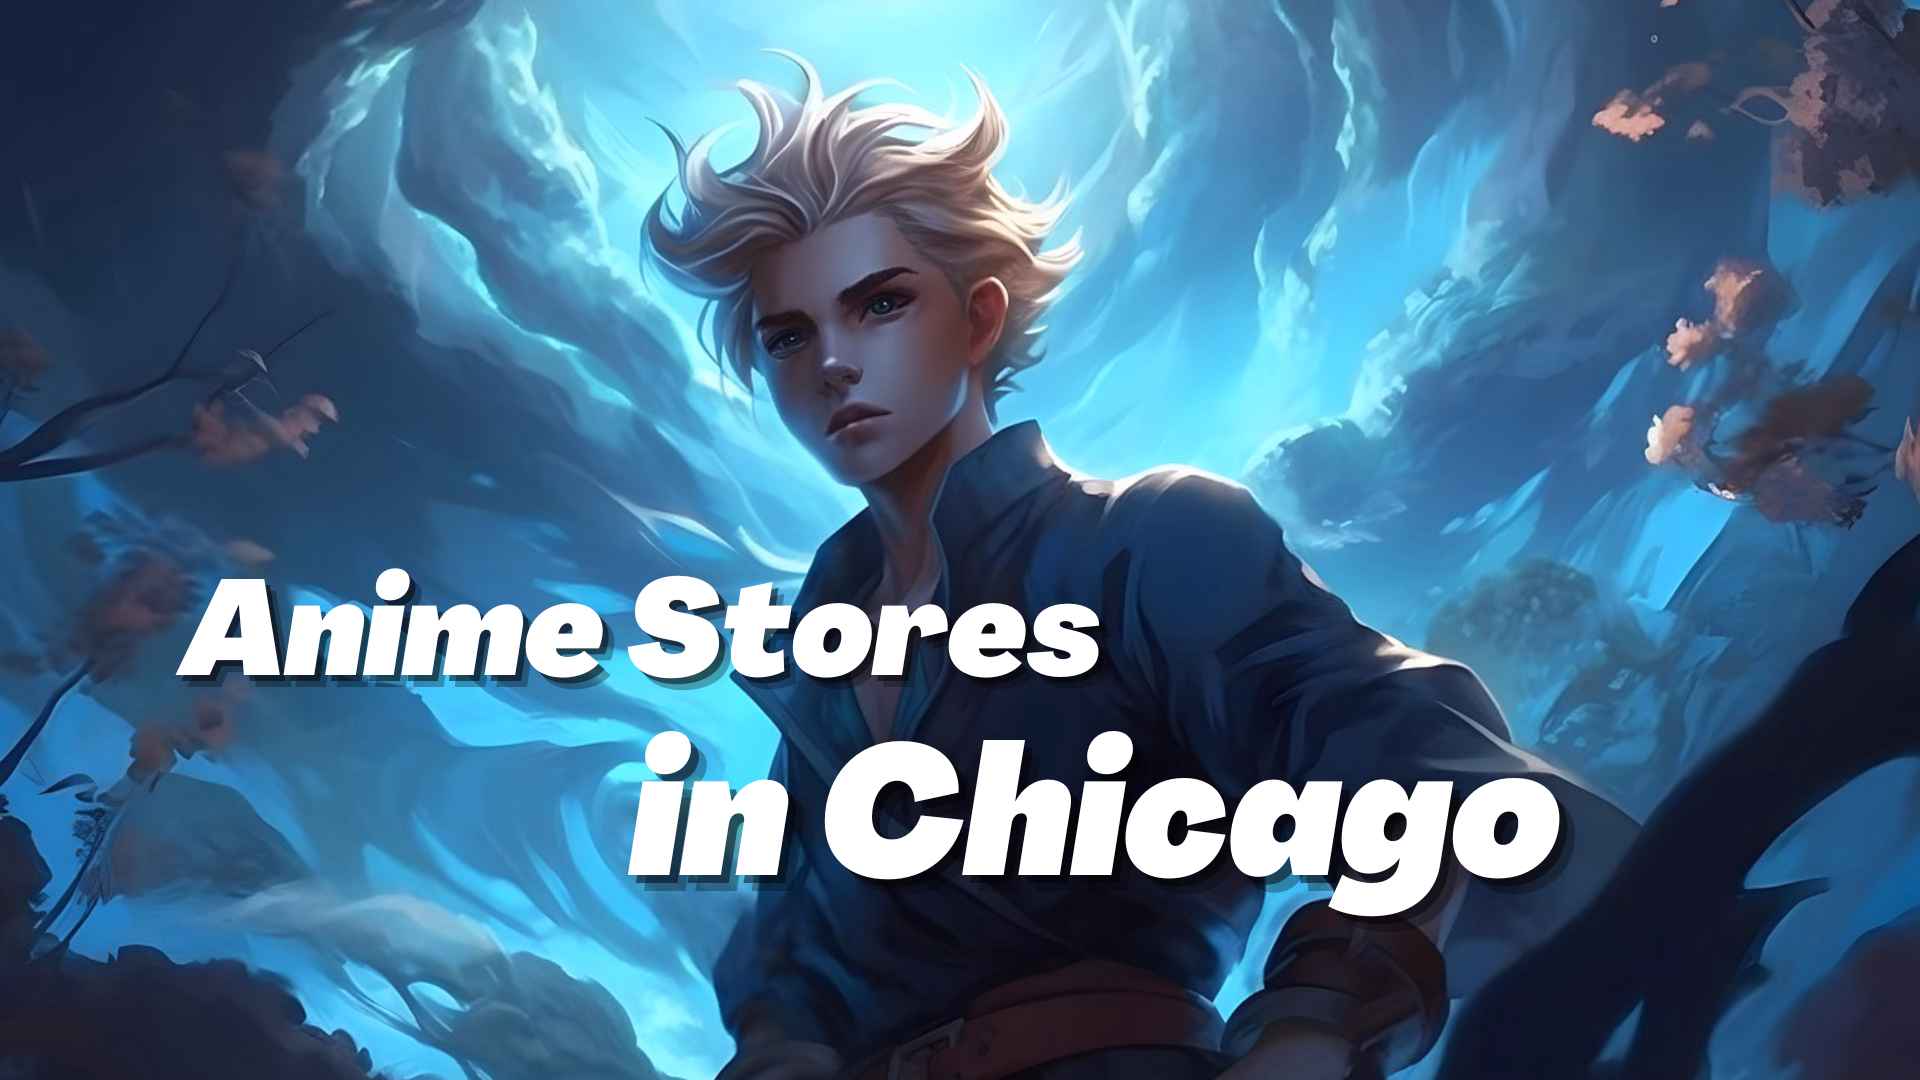 Anime Stores in Chicago